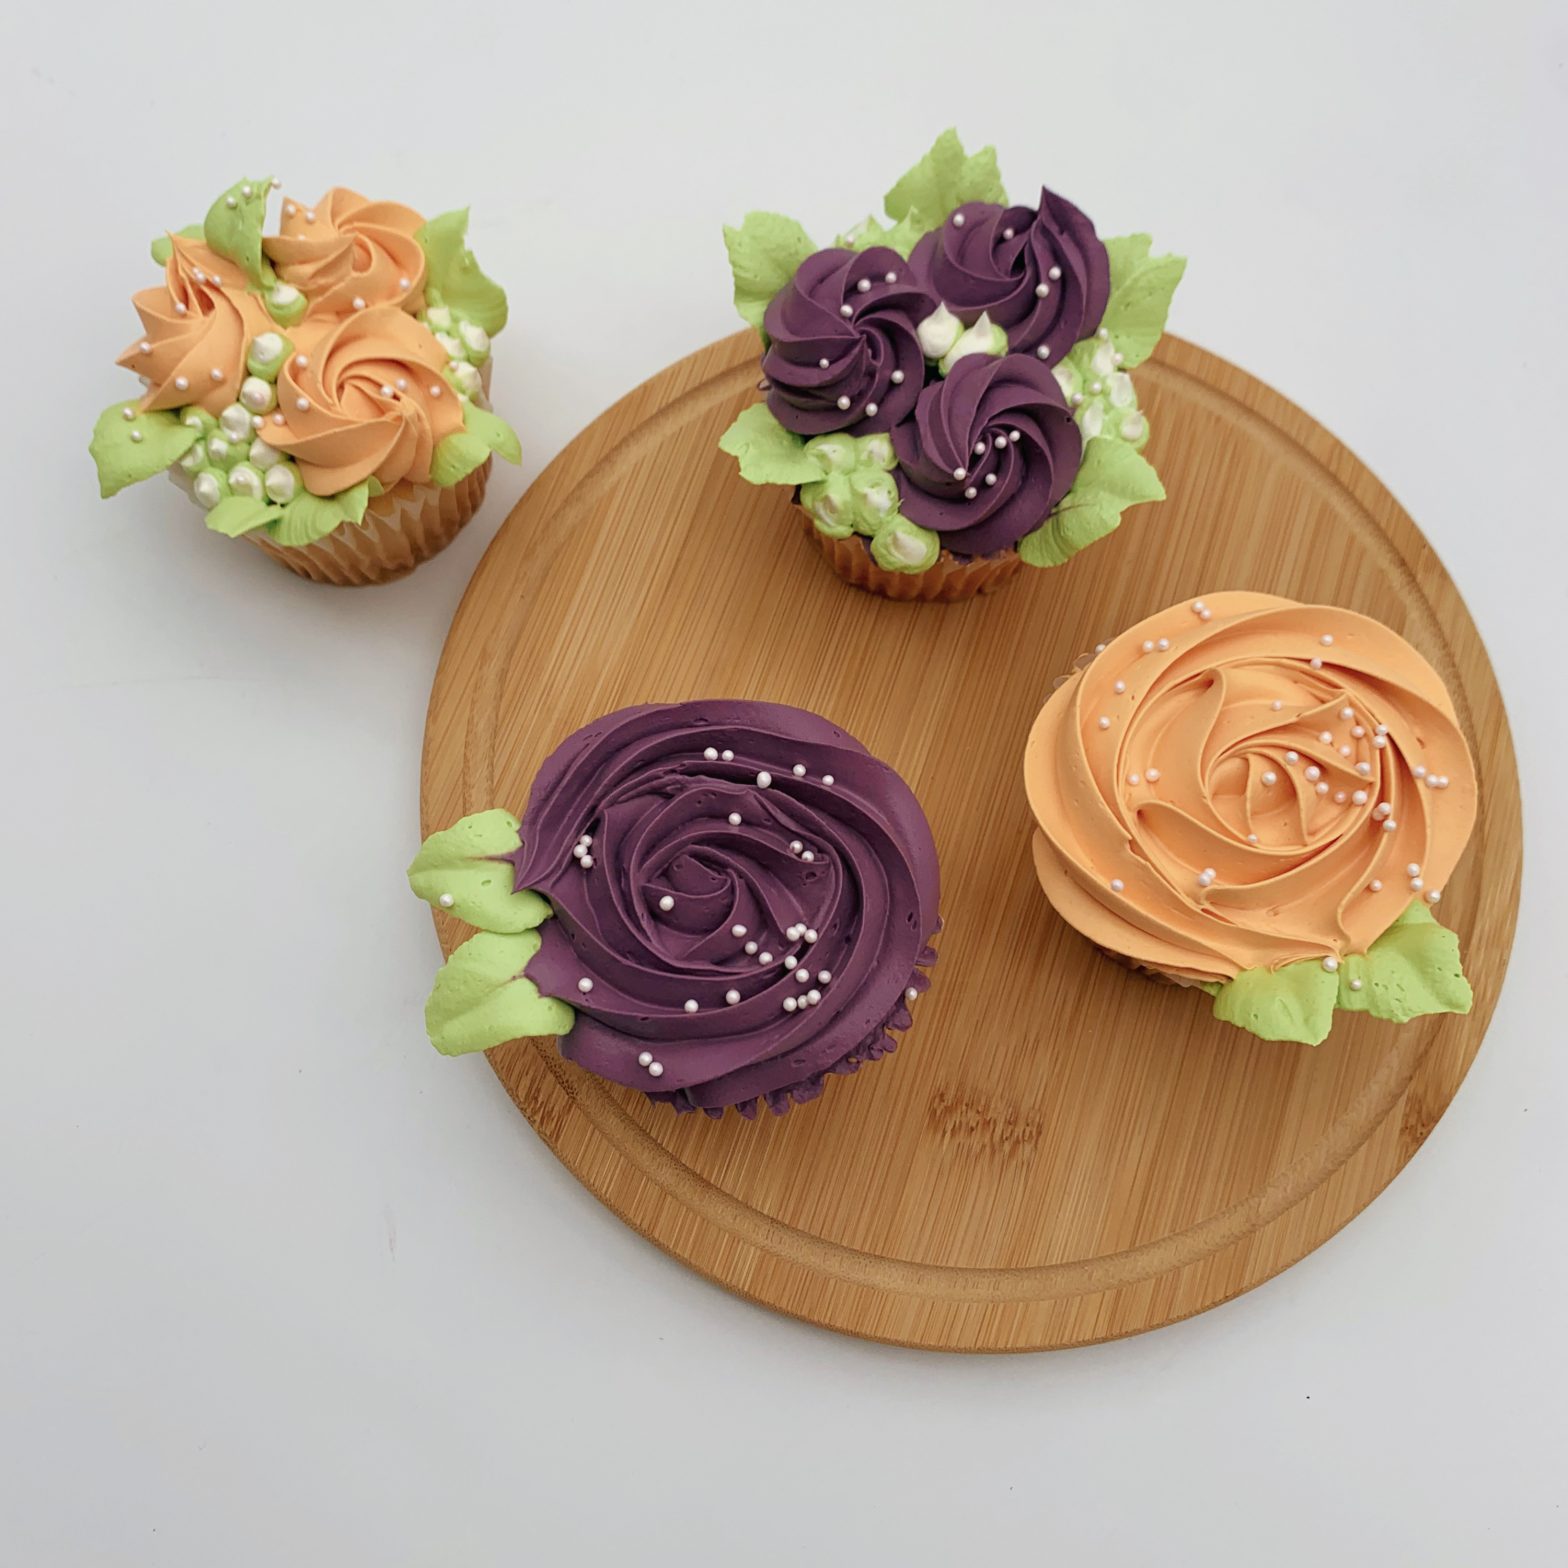 FLOWER CUPCAKES WITH STAR TIP